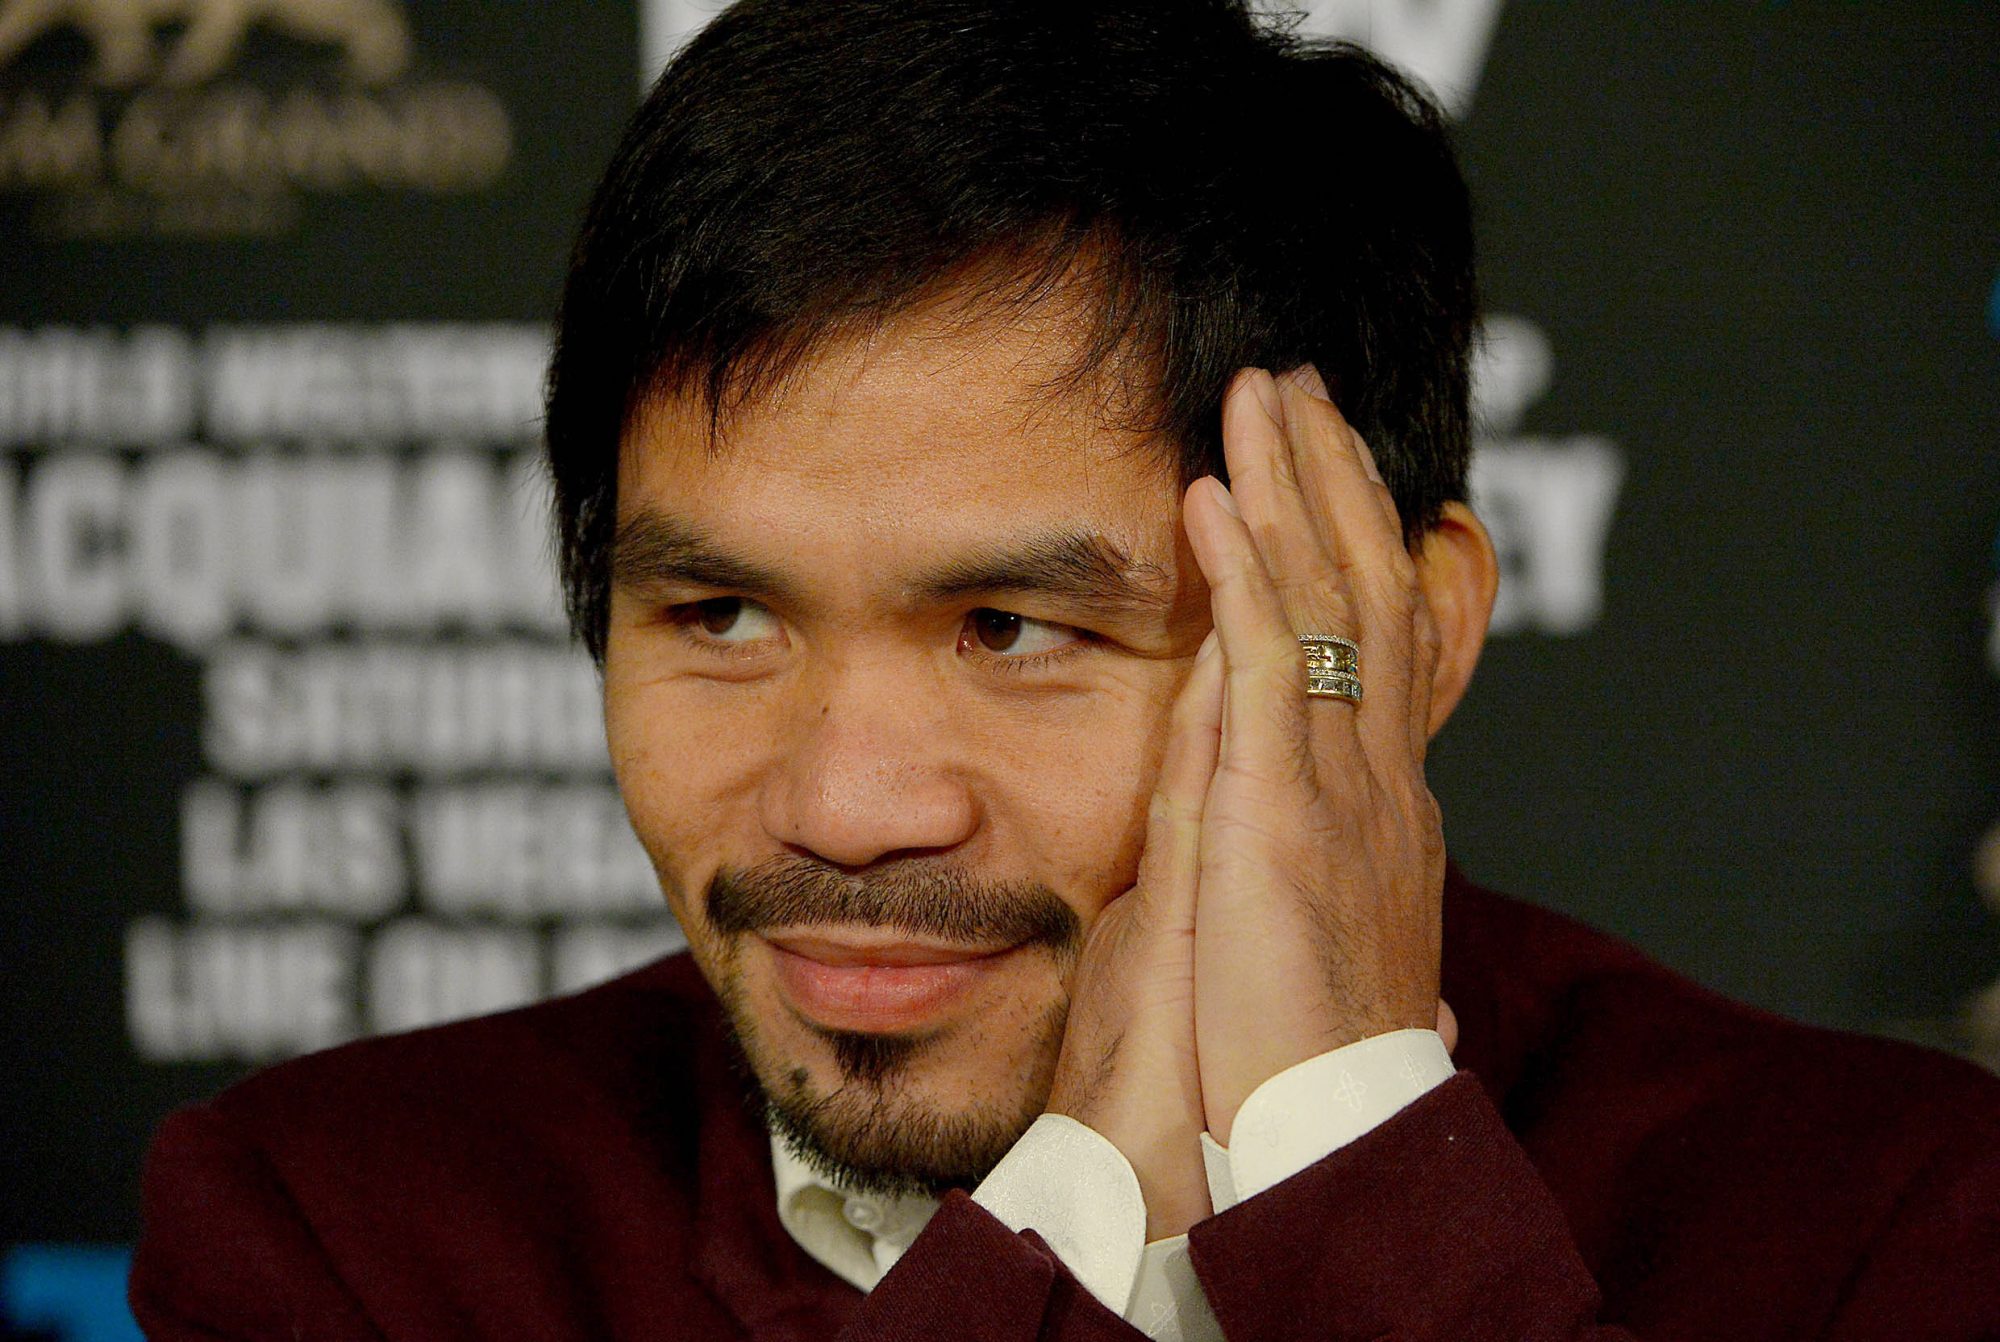 38 million reasons Manny Pacquiao holds off on becoming a full-fledged politician 